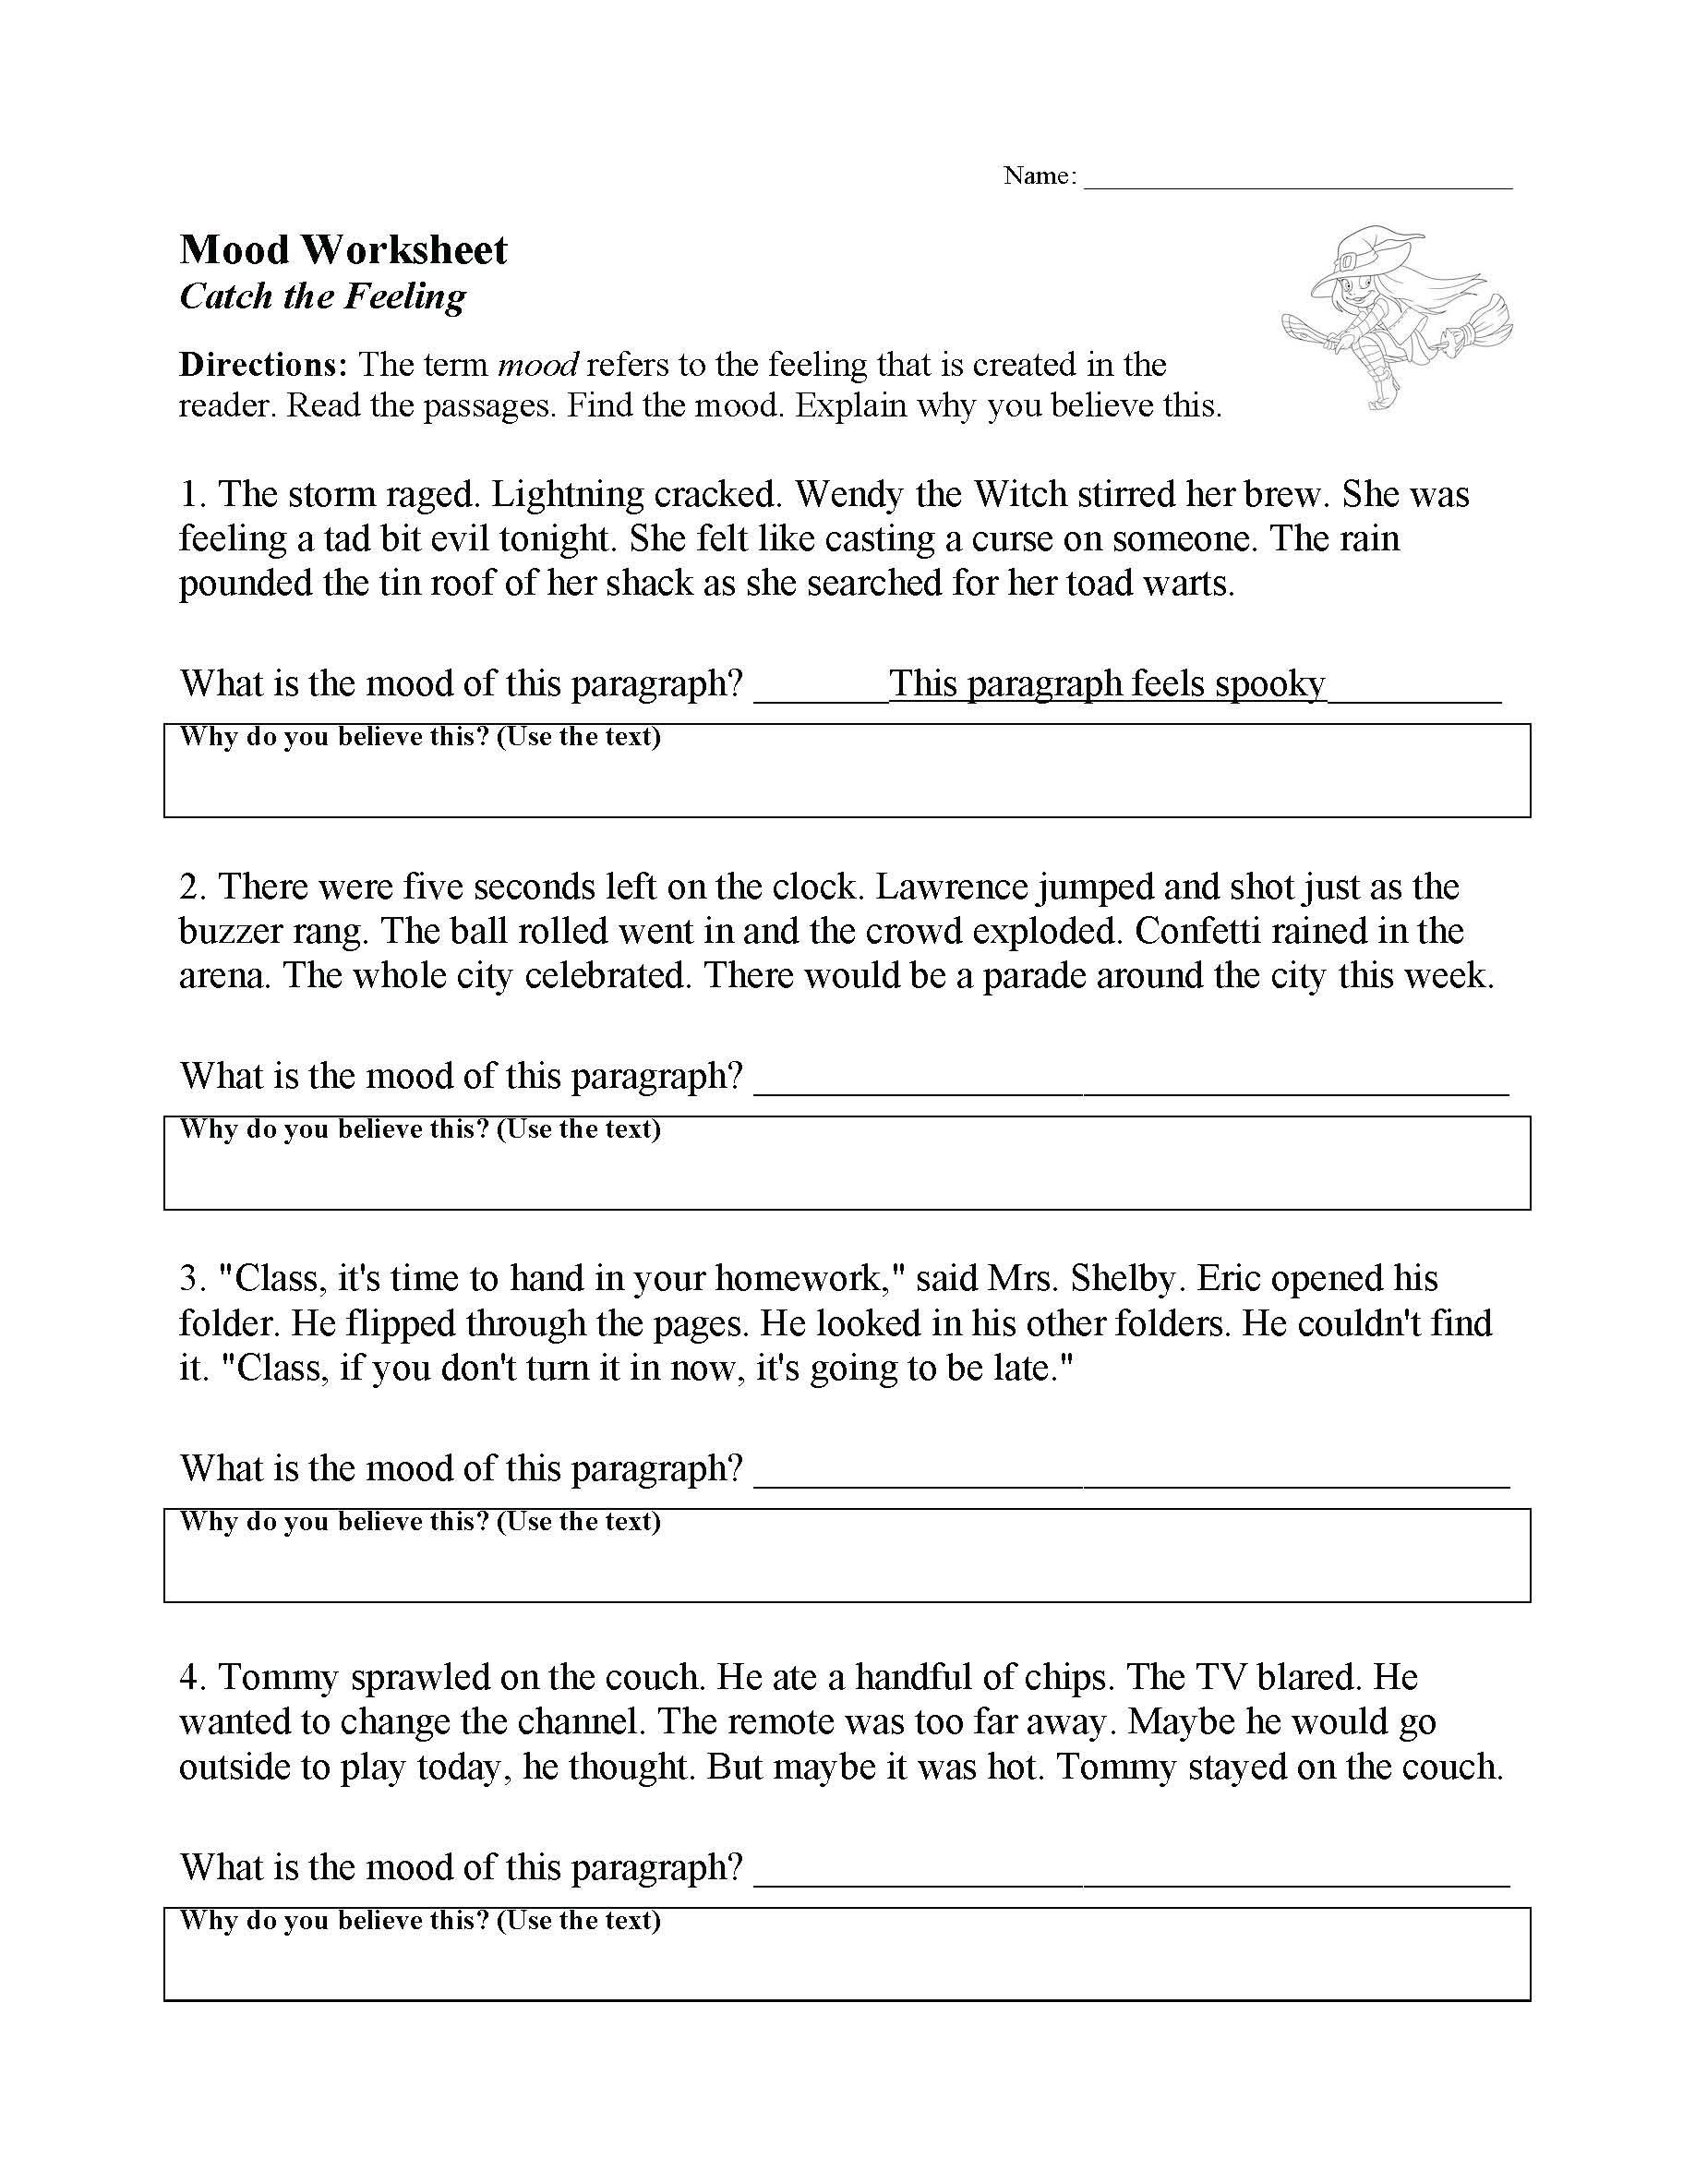 This is a preview image of our Mood Worksheet. Click on it to enlarge this image and view the source file.